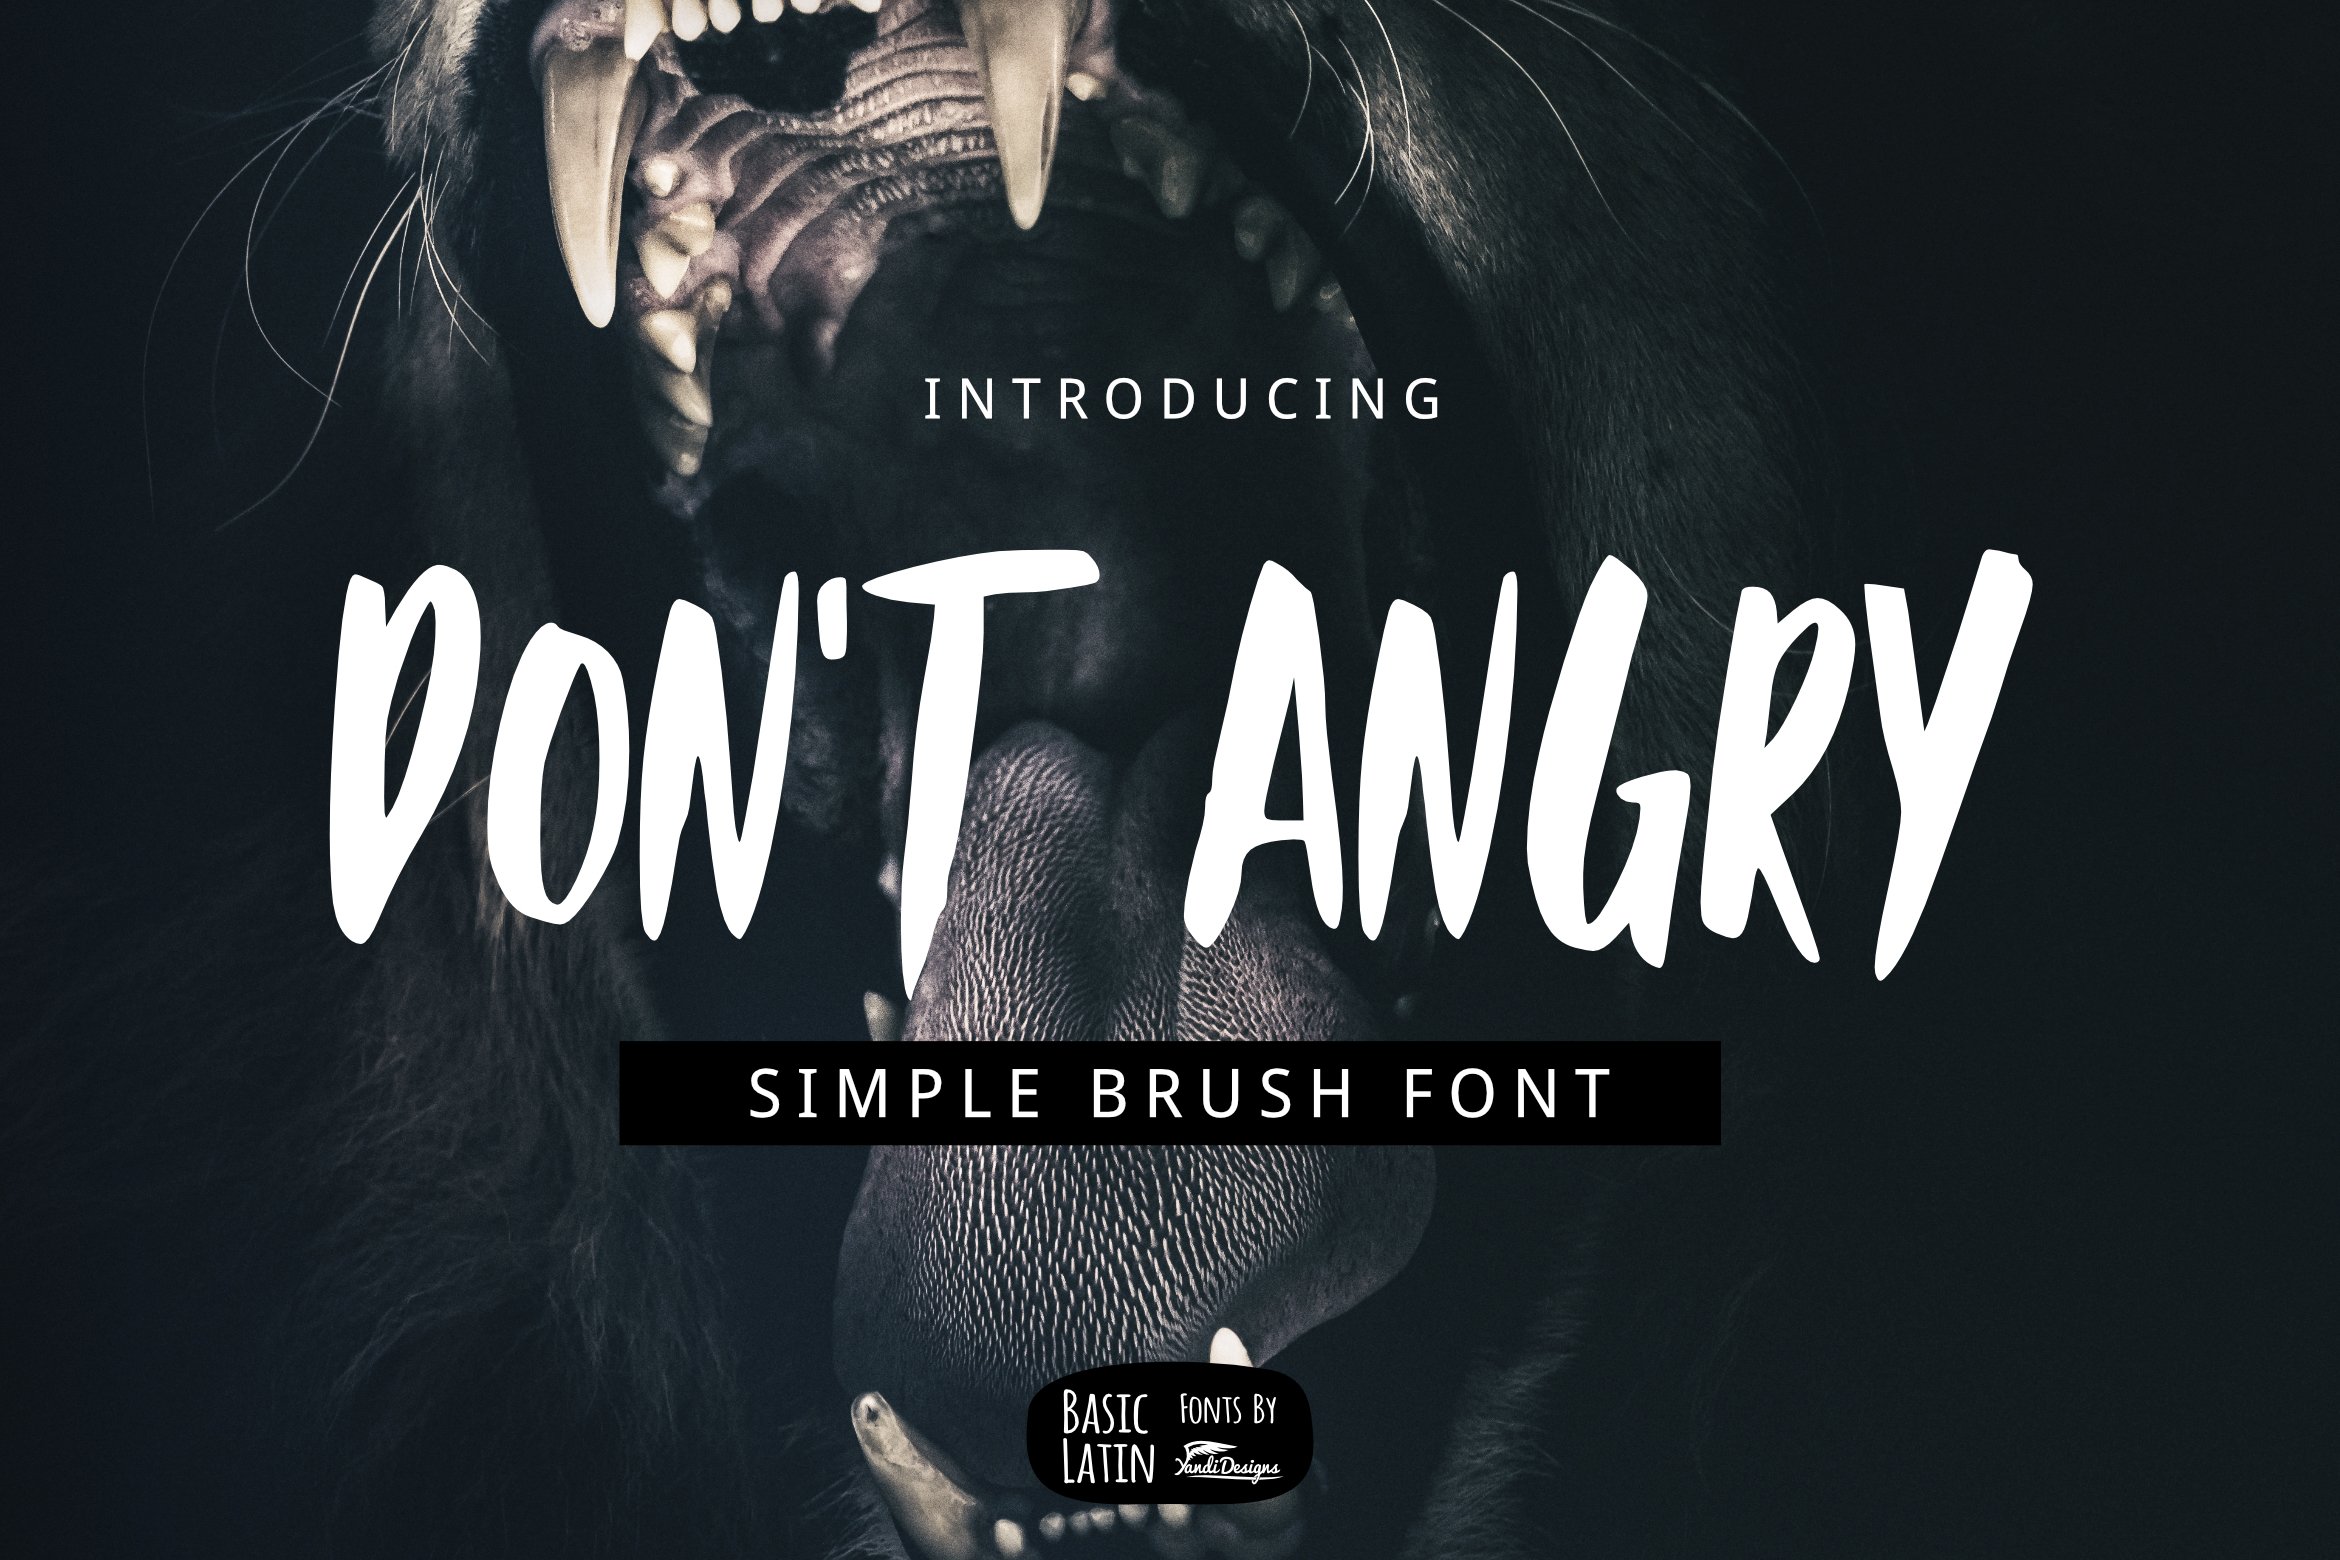 Don't Angry Font cover image.